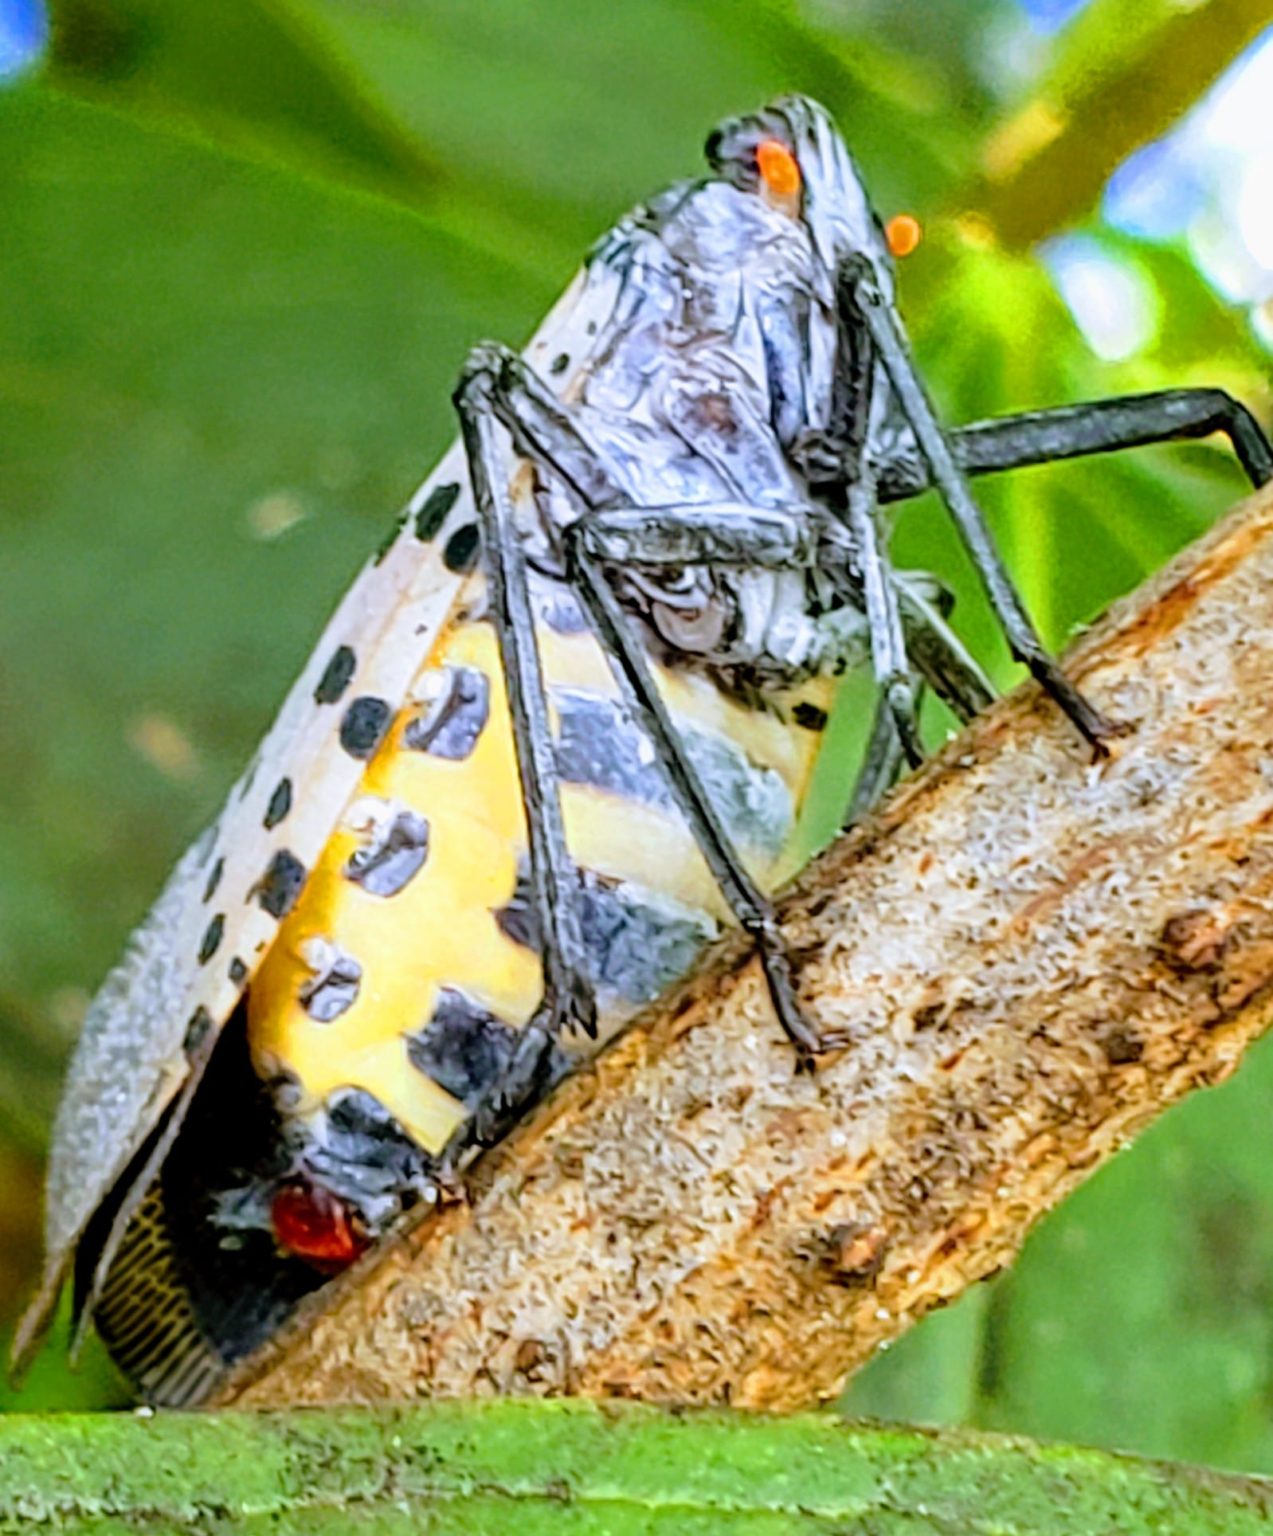 spotted lantern fly poison